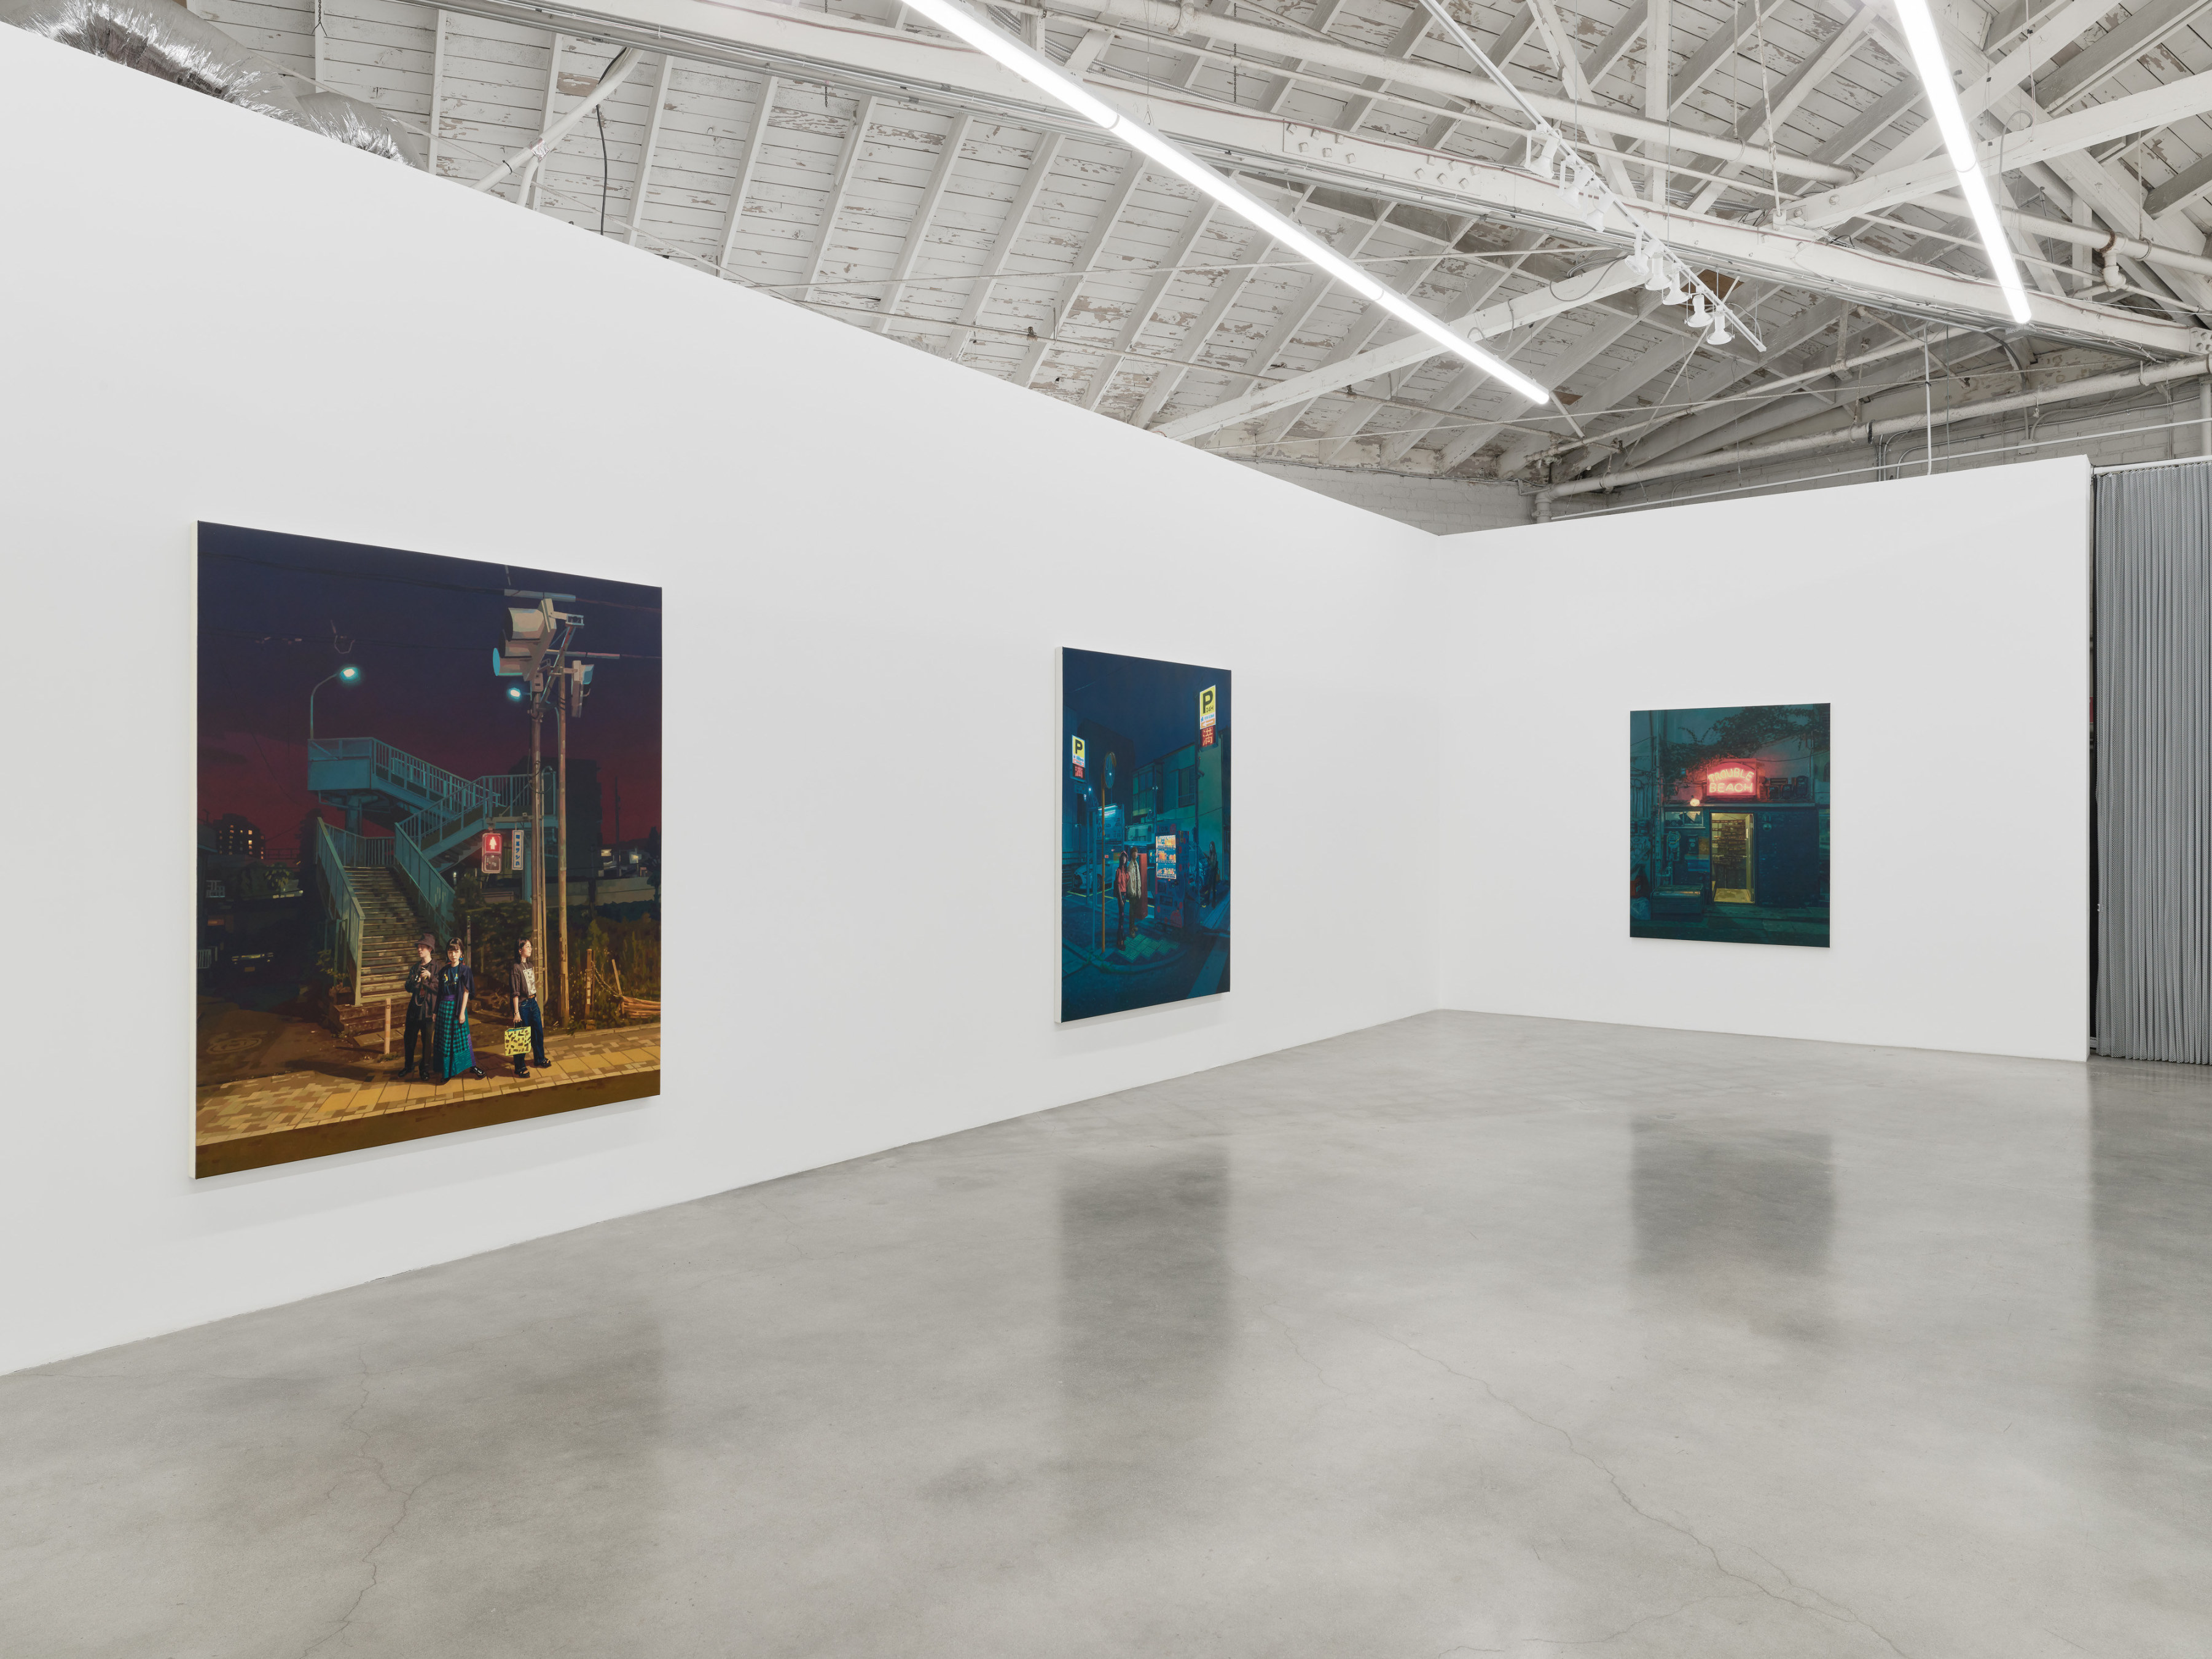 Installation view of Keita Morimoto's "as we didn't know it" at Night Gallery. 